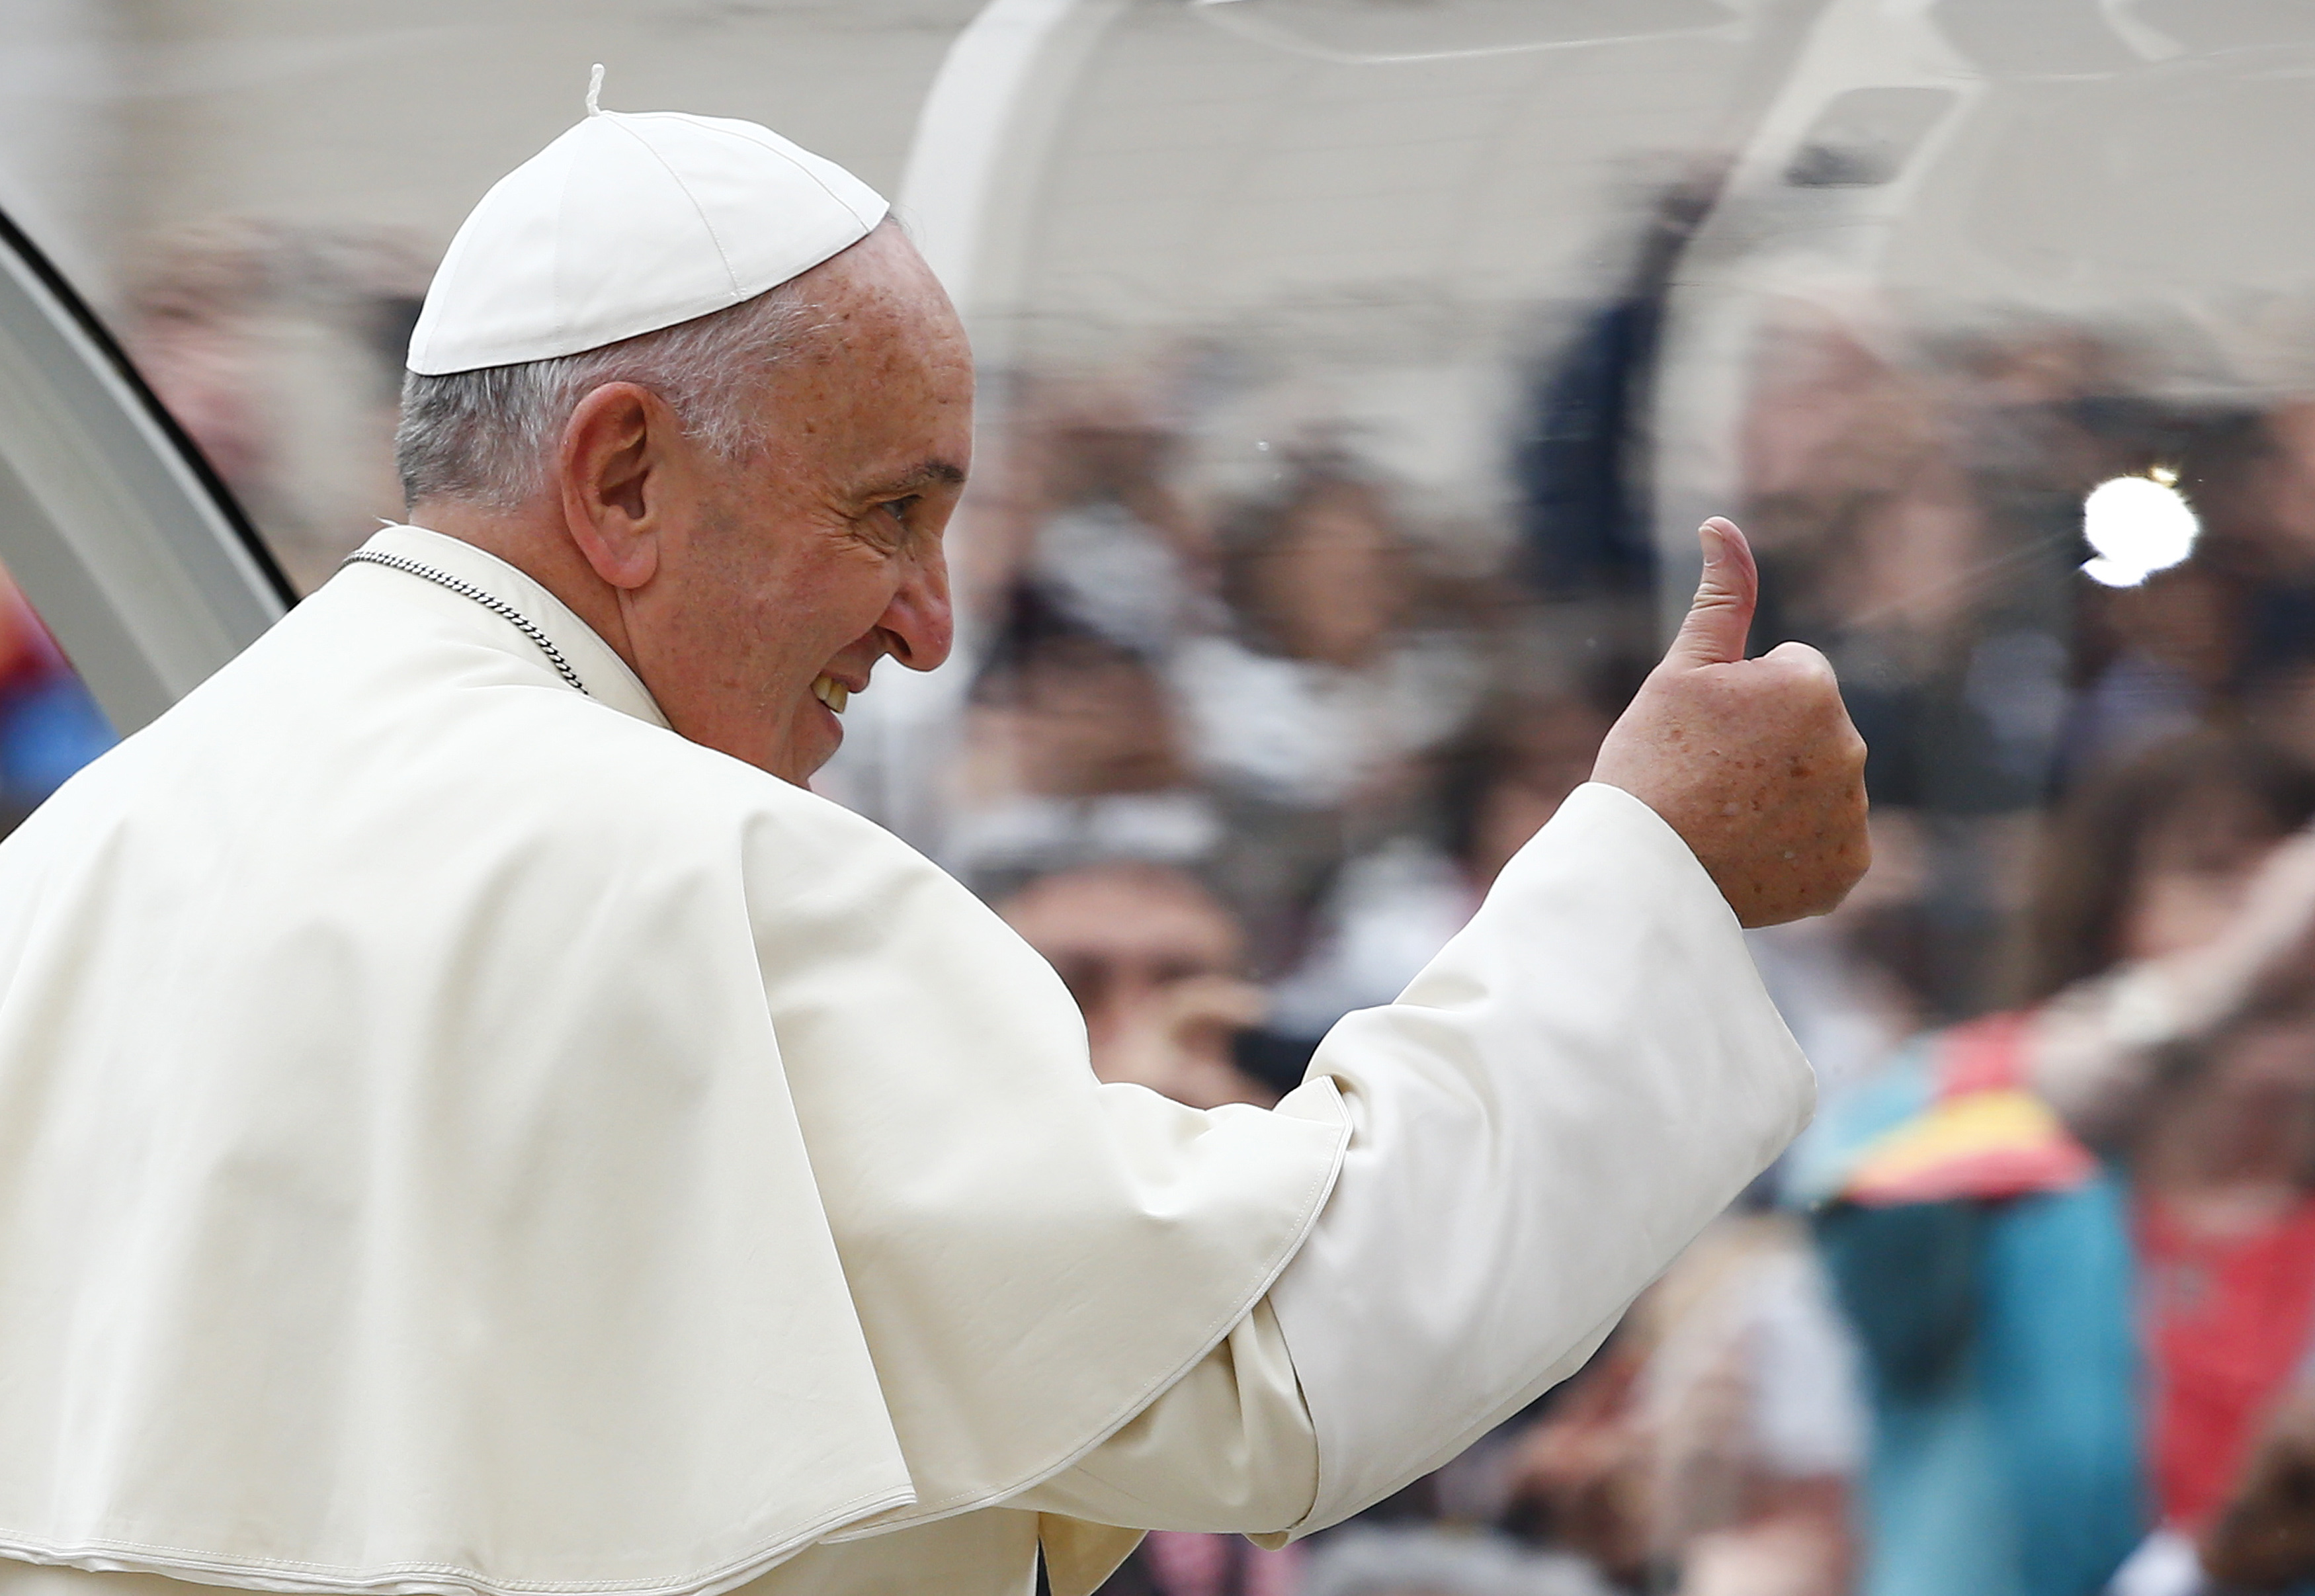 Pope Francis gestures as he arrives to lead his weekly general audience in Saint Peter's Square at the Vatican November 12, 2014. (Tony Gentile—Reuters)